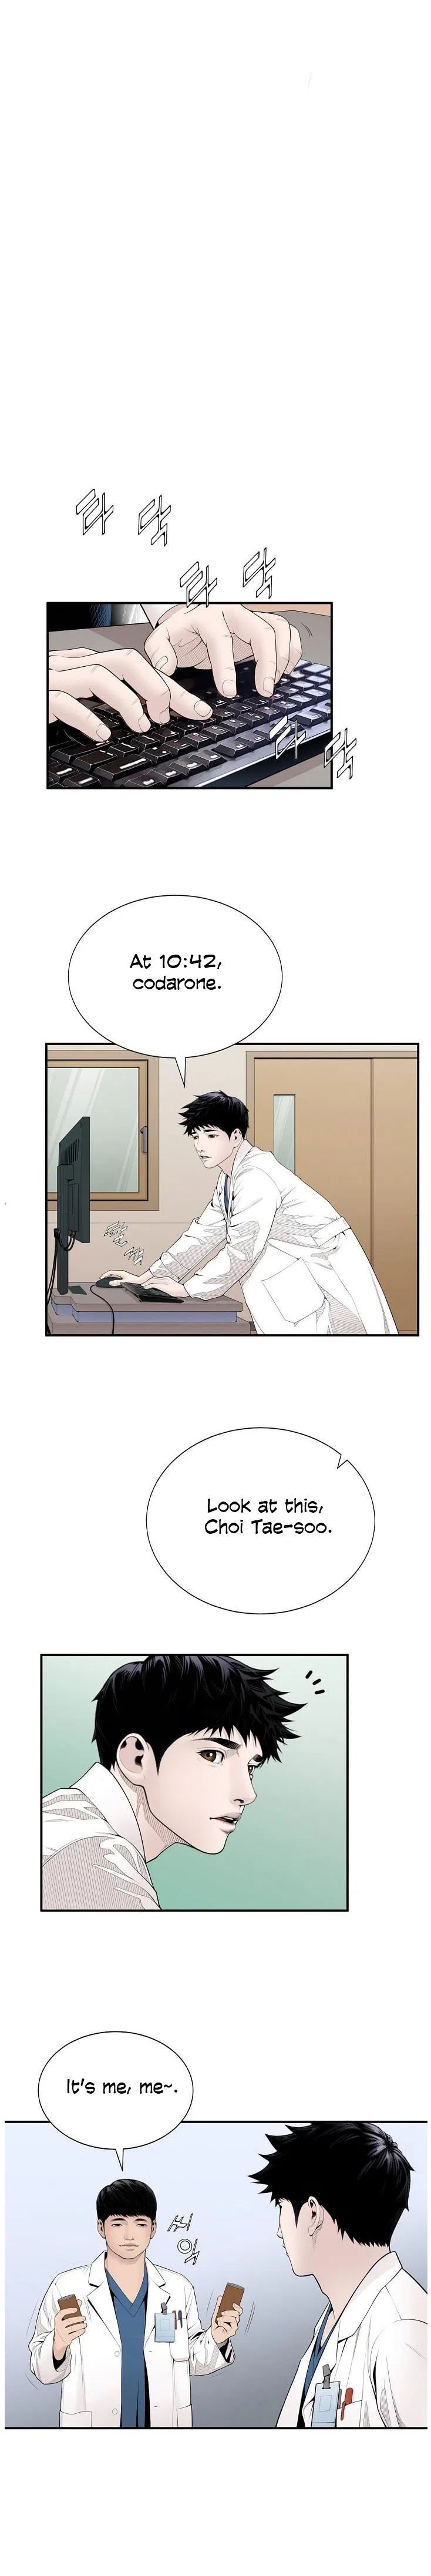 Dr. Choi Tae-Soo Chapter 11 page 4